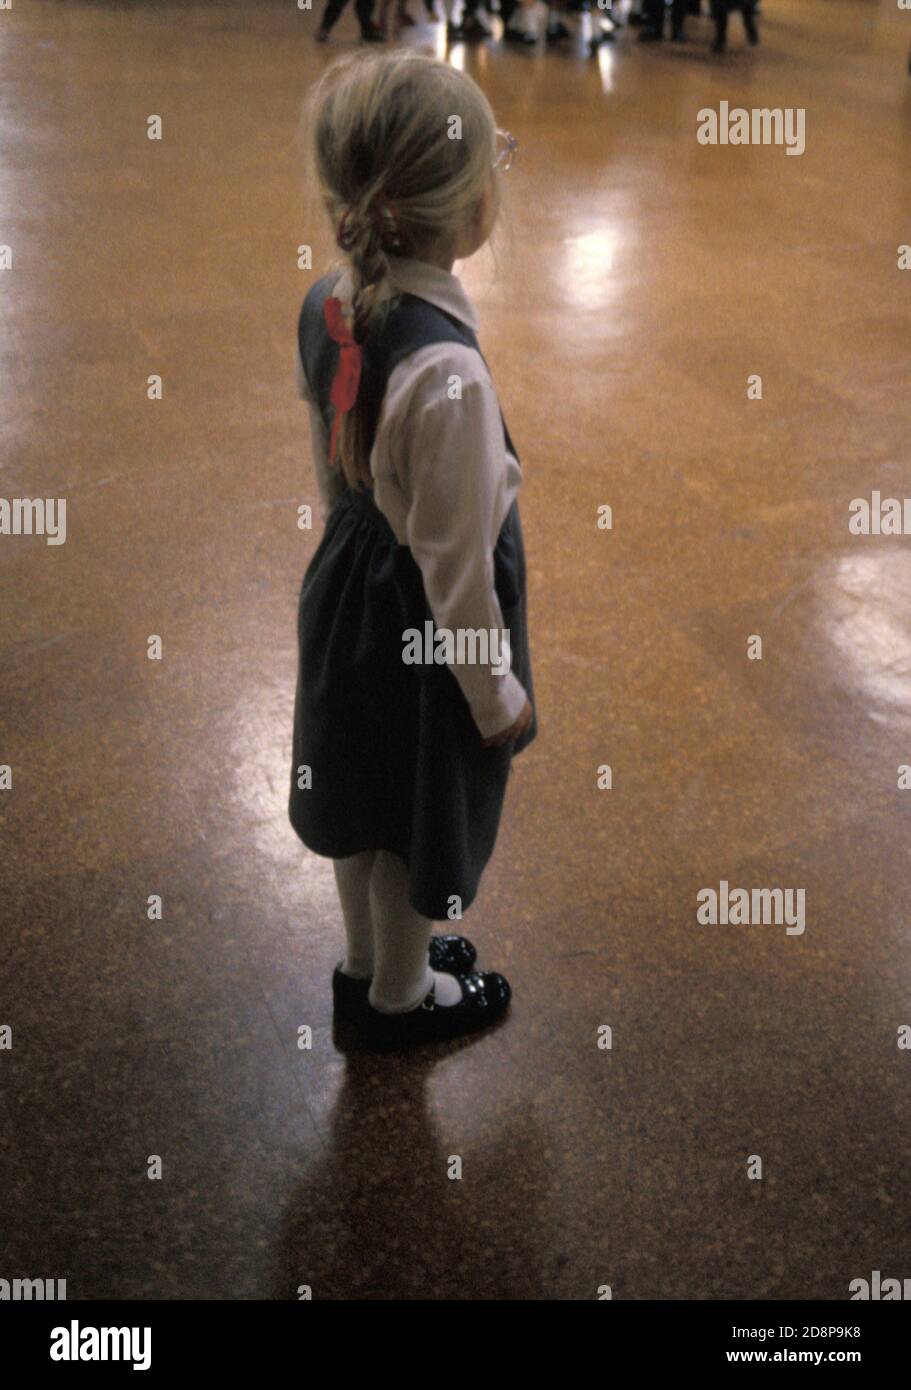 girl in infant school hall standing alone Stock Photo